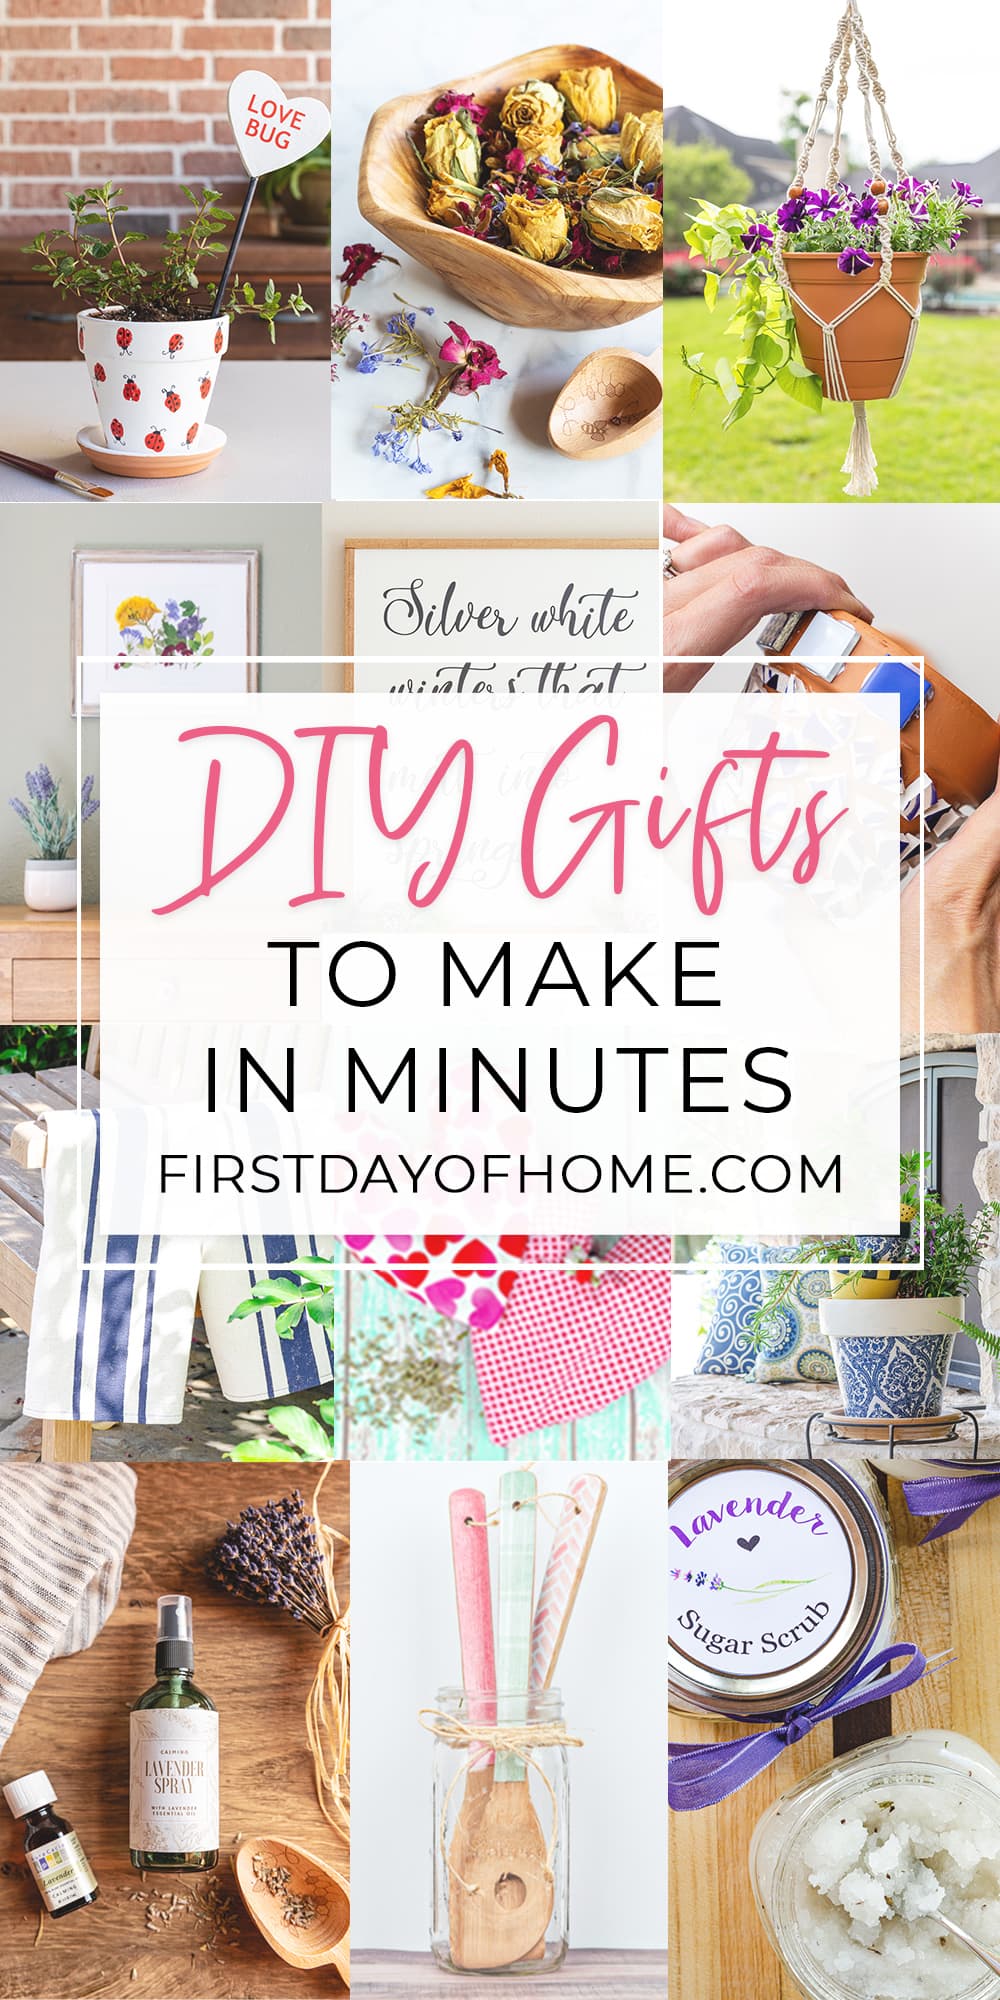 Collage of arts and crafts projects with text overlay reading "DIY Gifts to Make in Minutes"